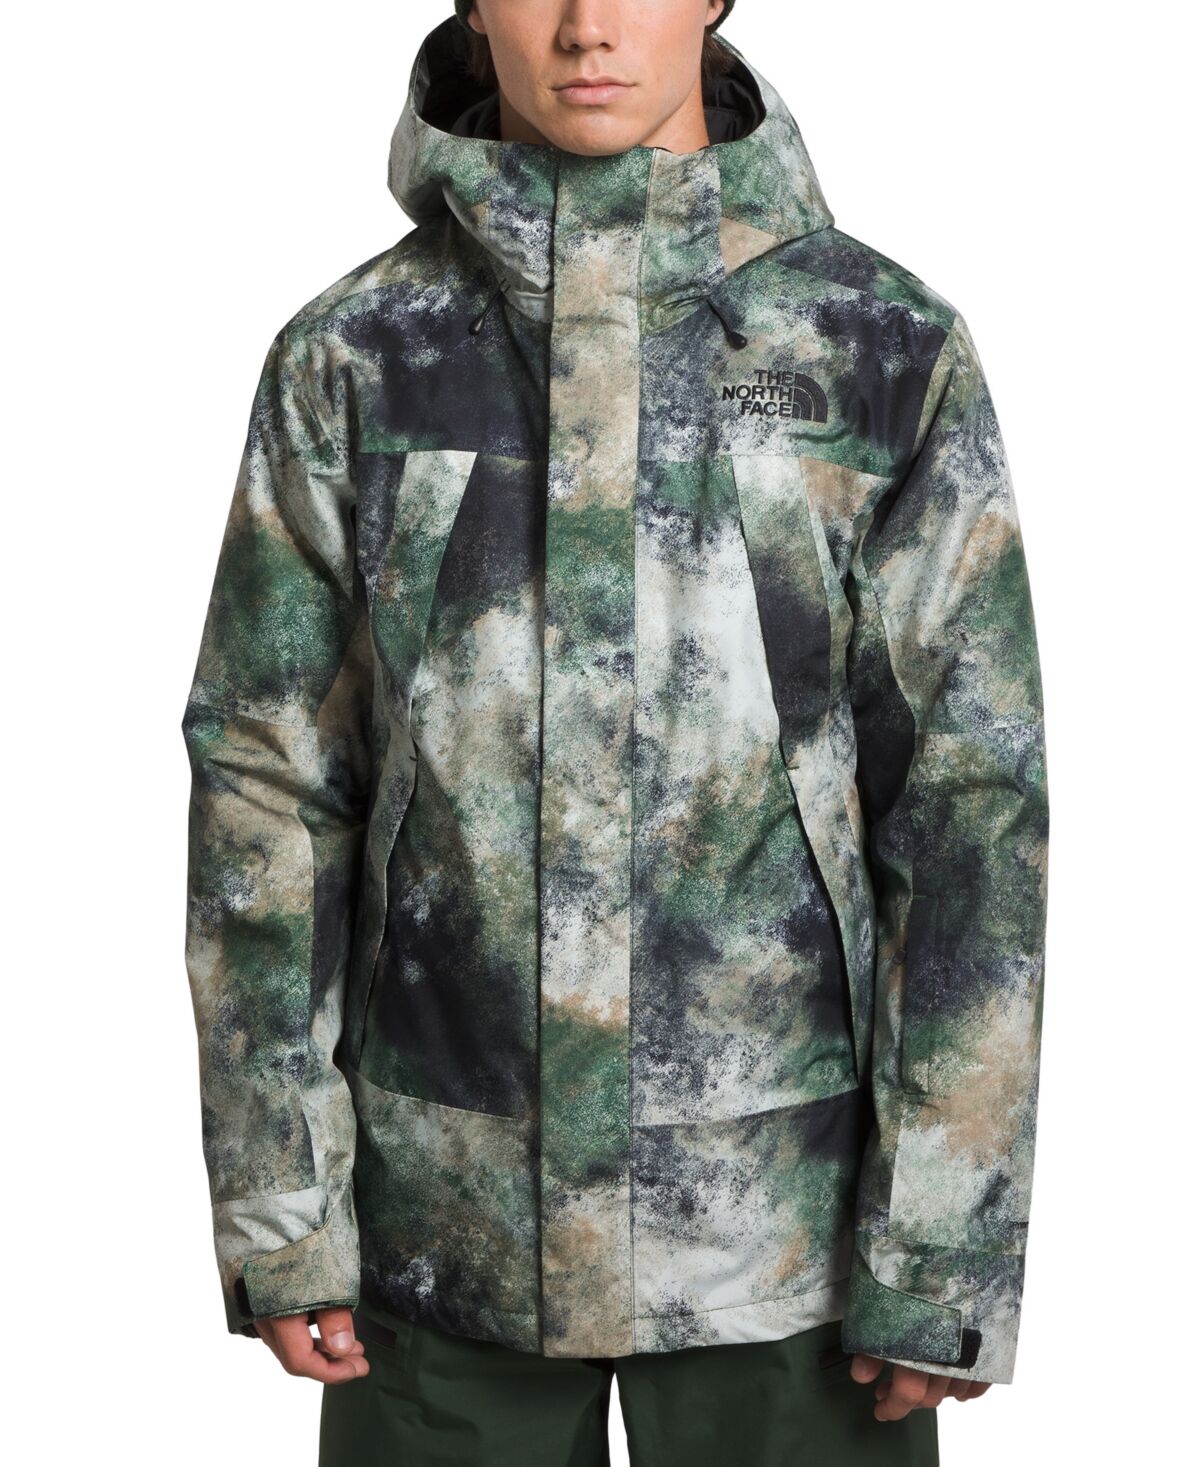 The North Face Men's Clement Triclimate Jacket - Pine Needle Faded Dye Camo Print